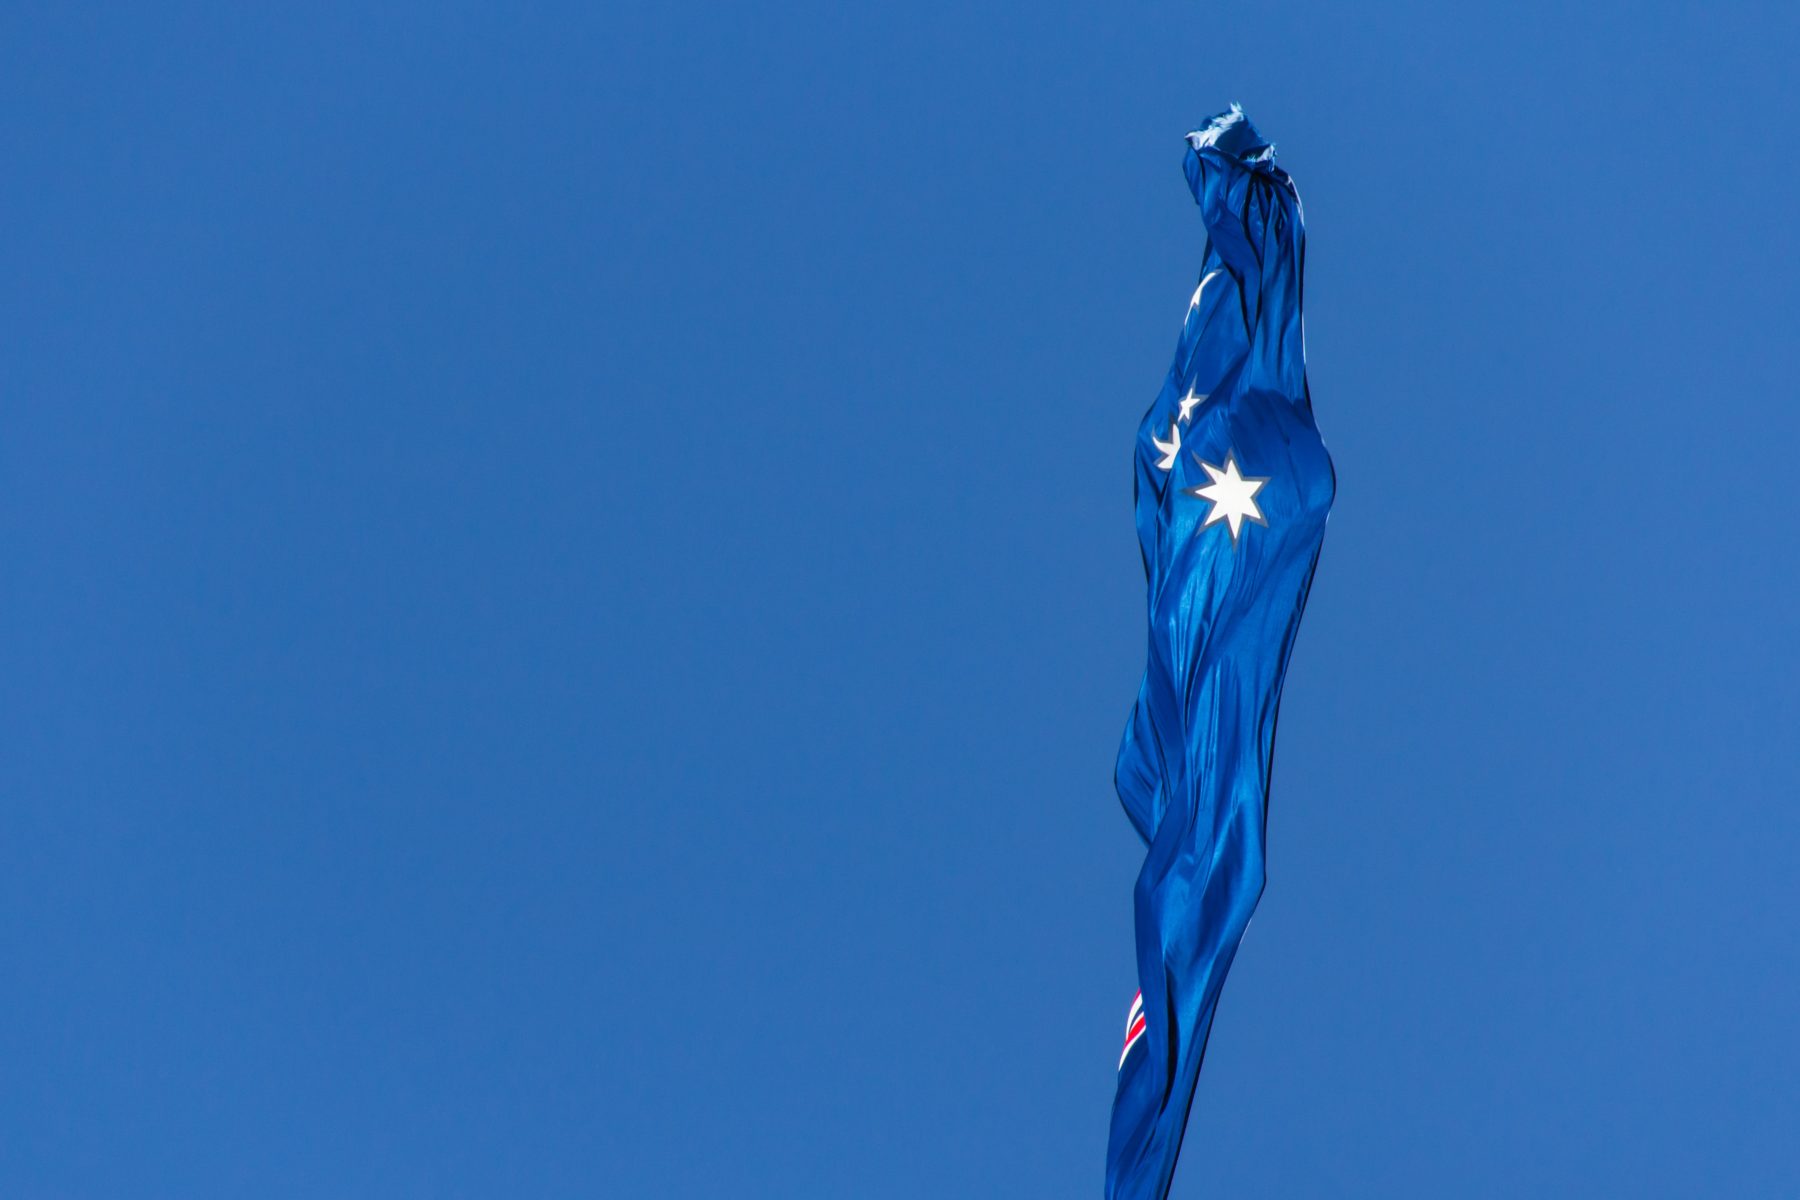 The Australian flag blowing in the breeze with blue sky in the background.